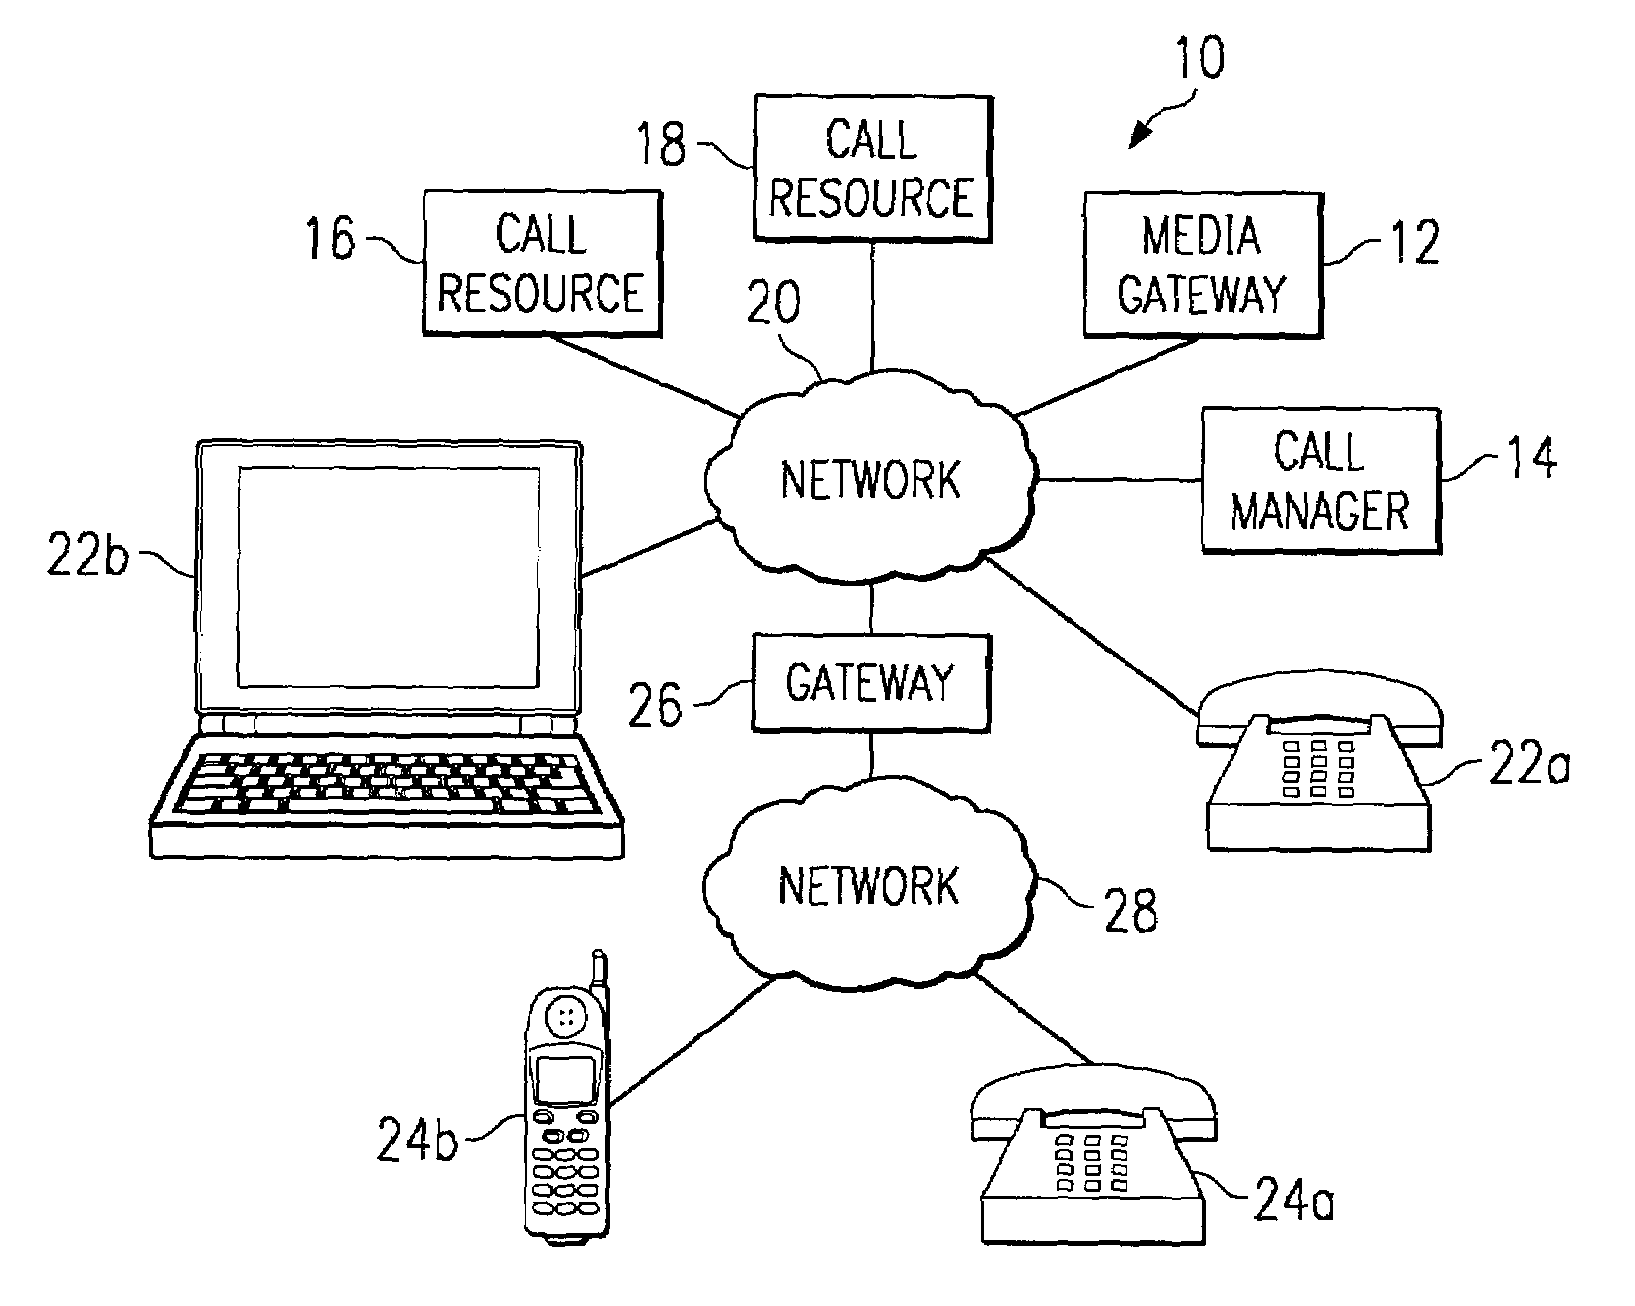 Apparatus and method for allocating call resources during a conference call